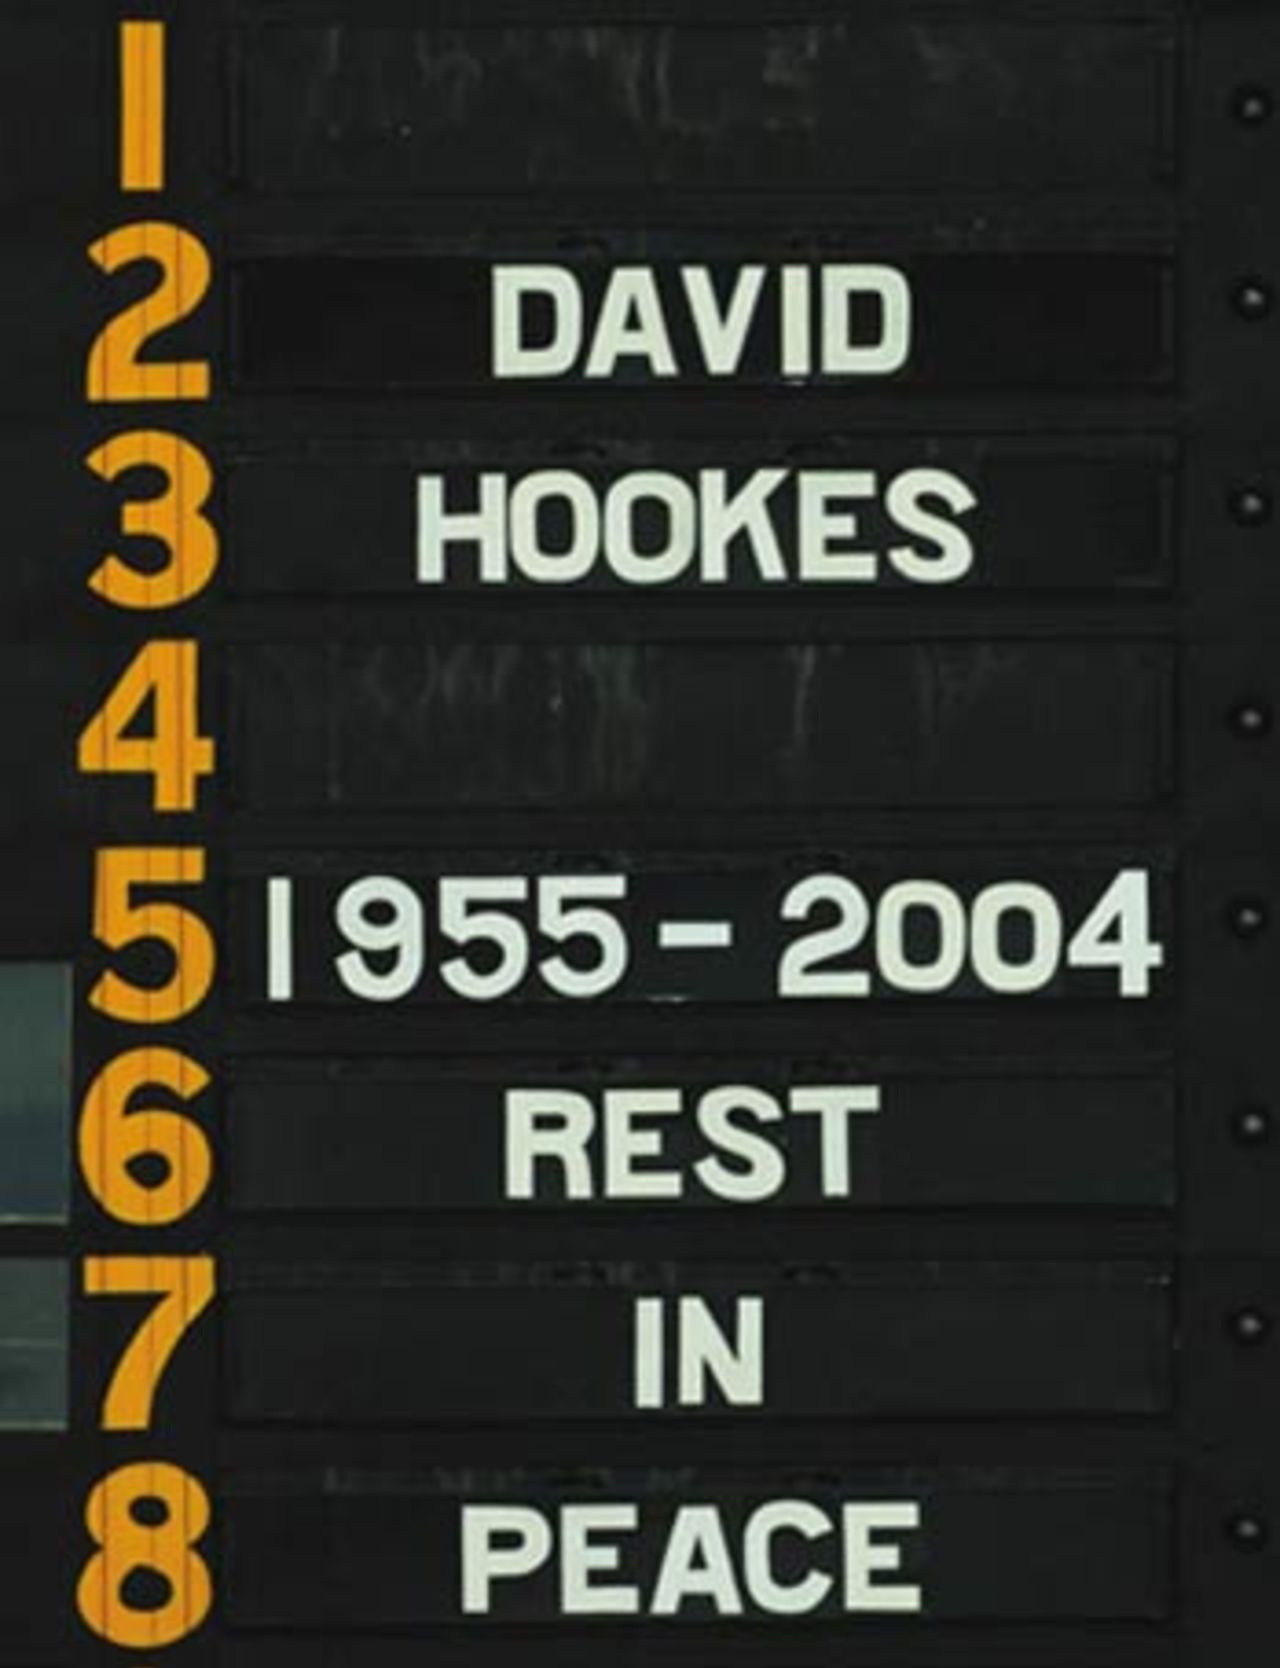 The giant scoreboard at the Adelaide Oval salutes the man, Adelaide, January 27, 2004